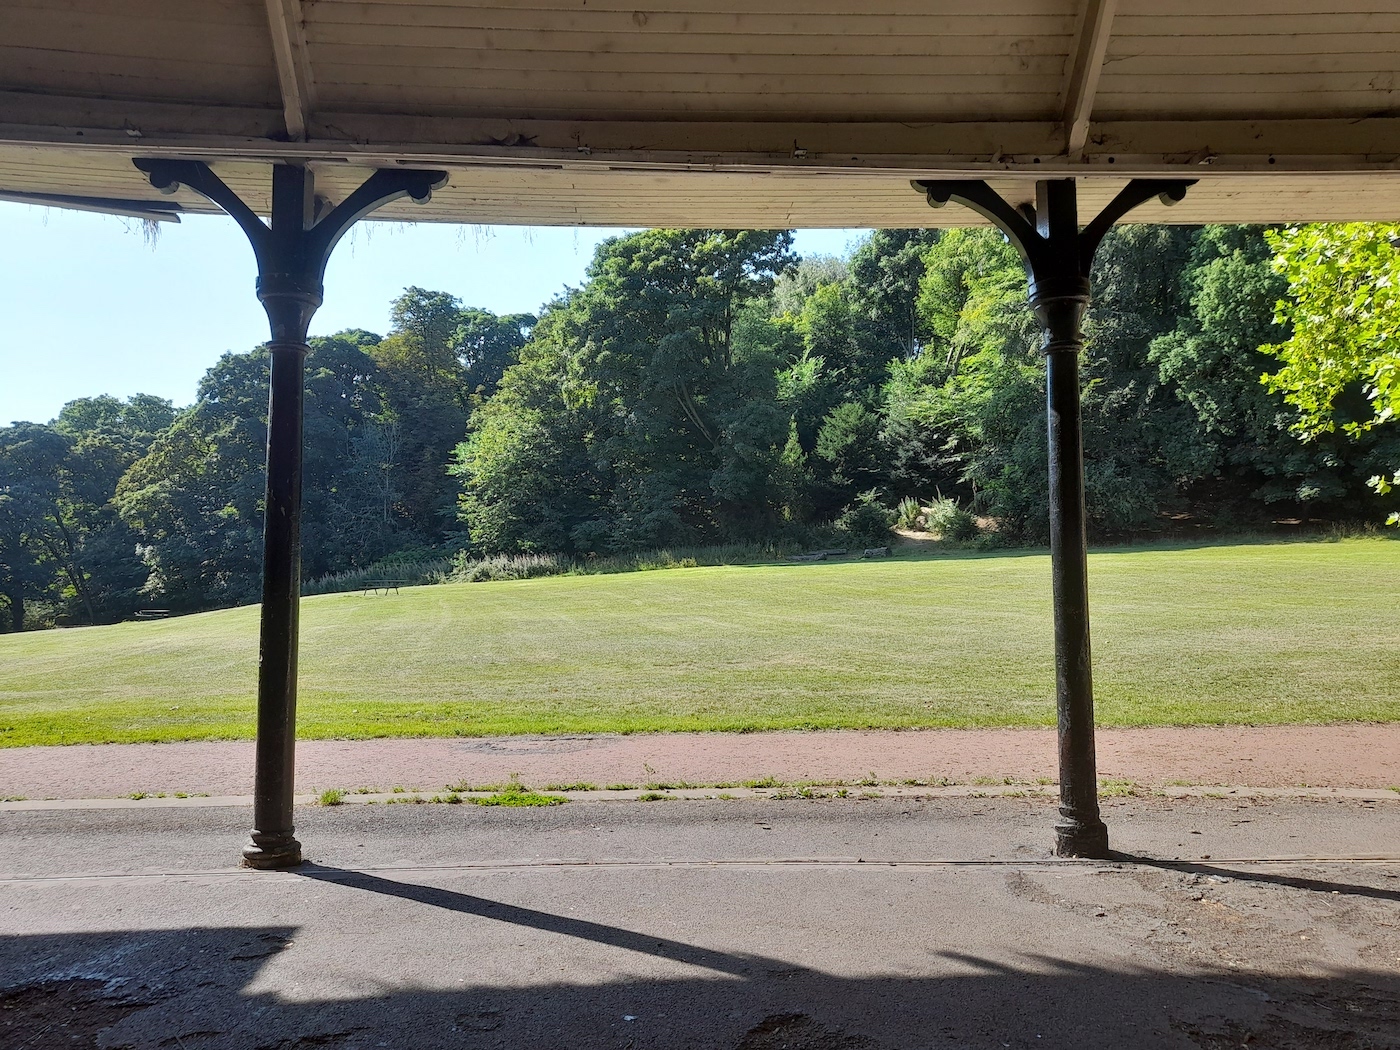 A view over a green field and trees from under a wooden pavillion